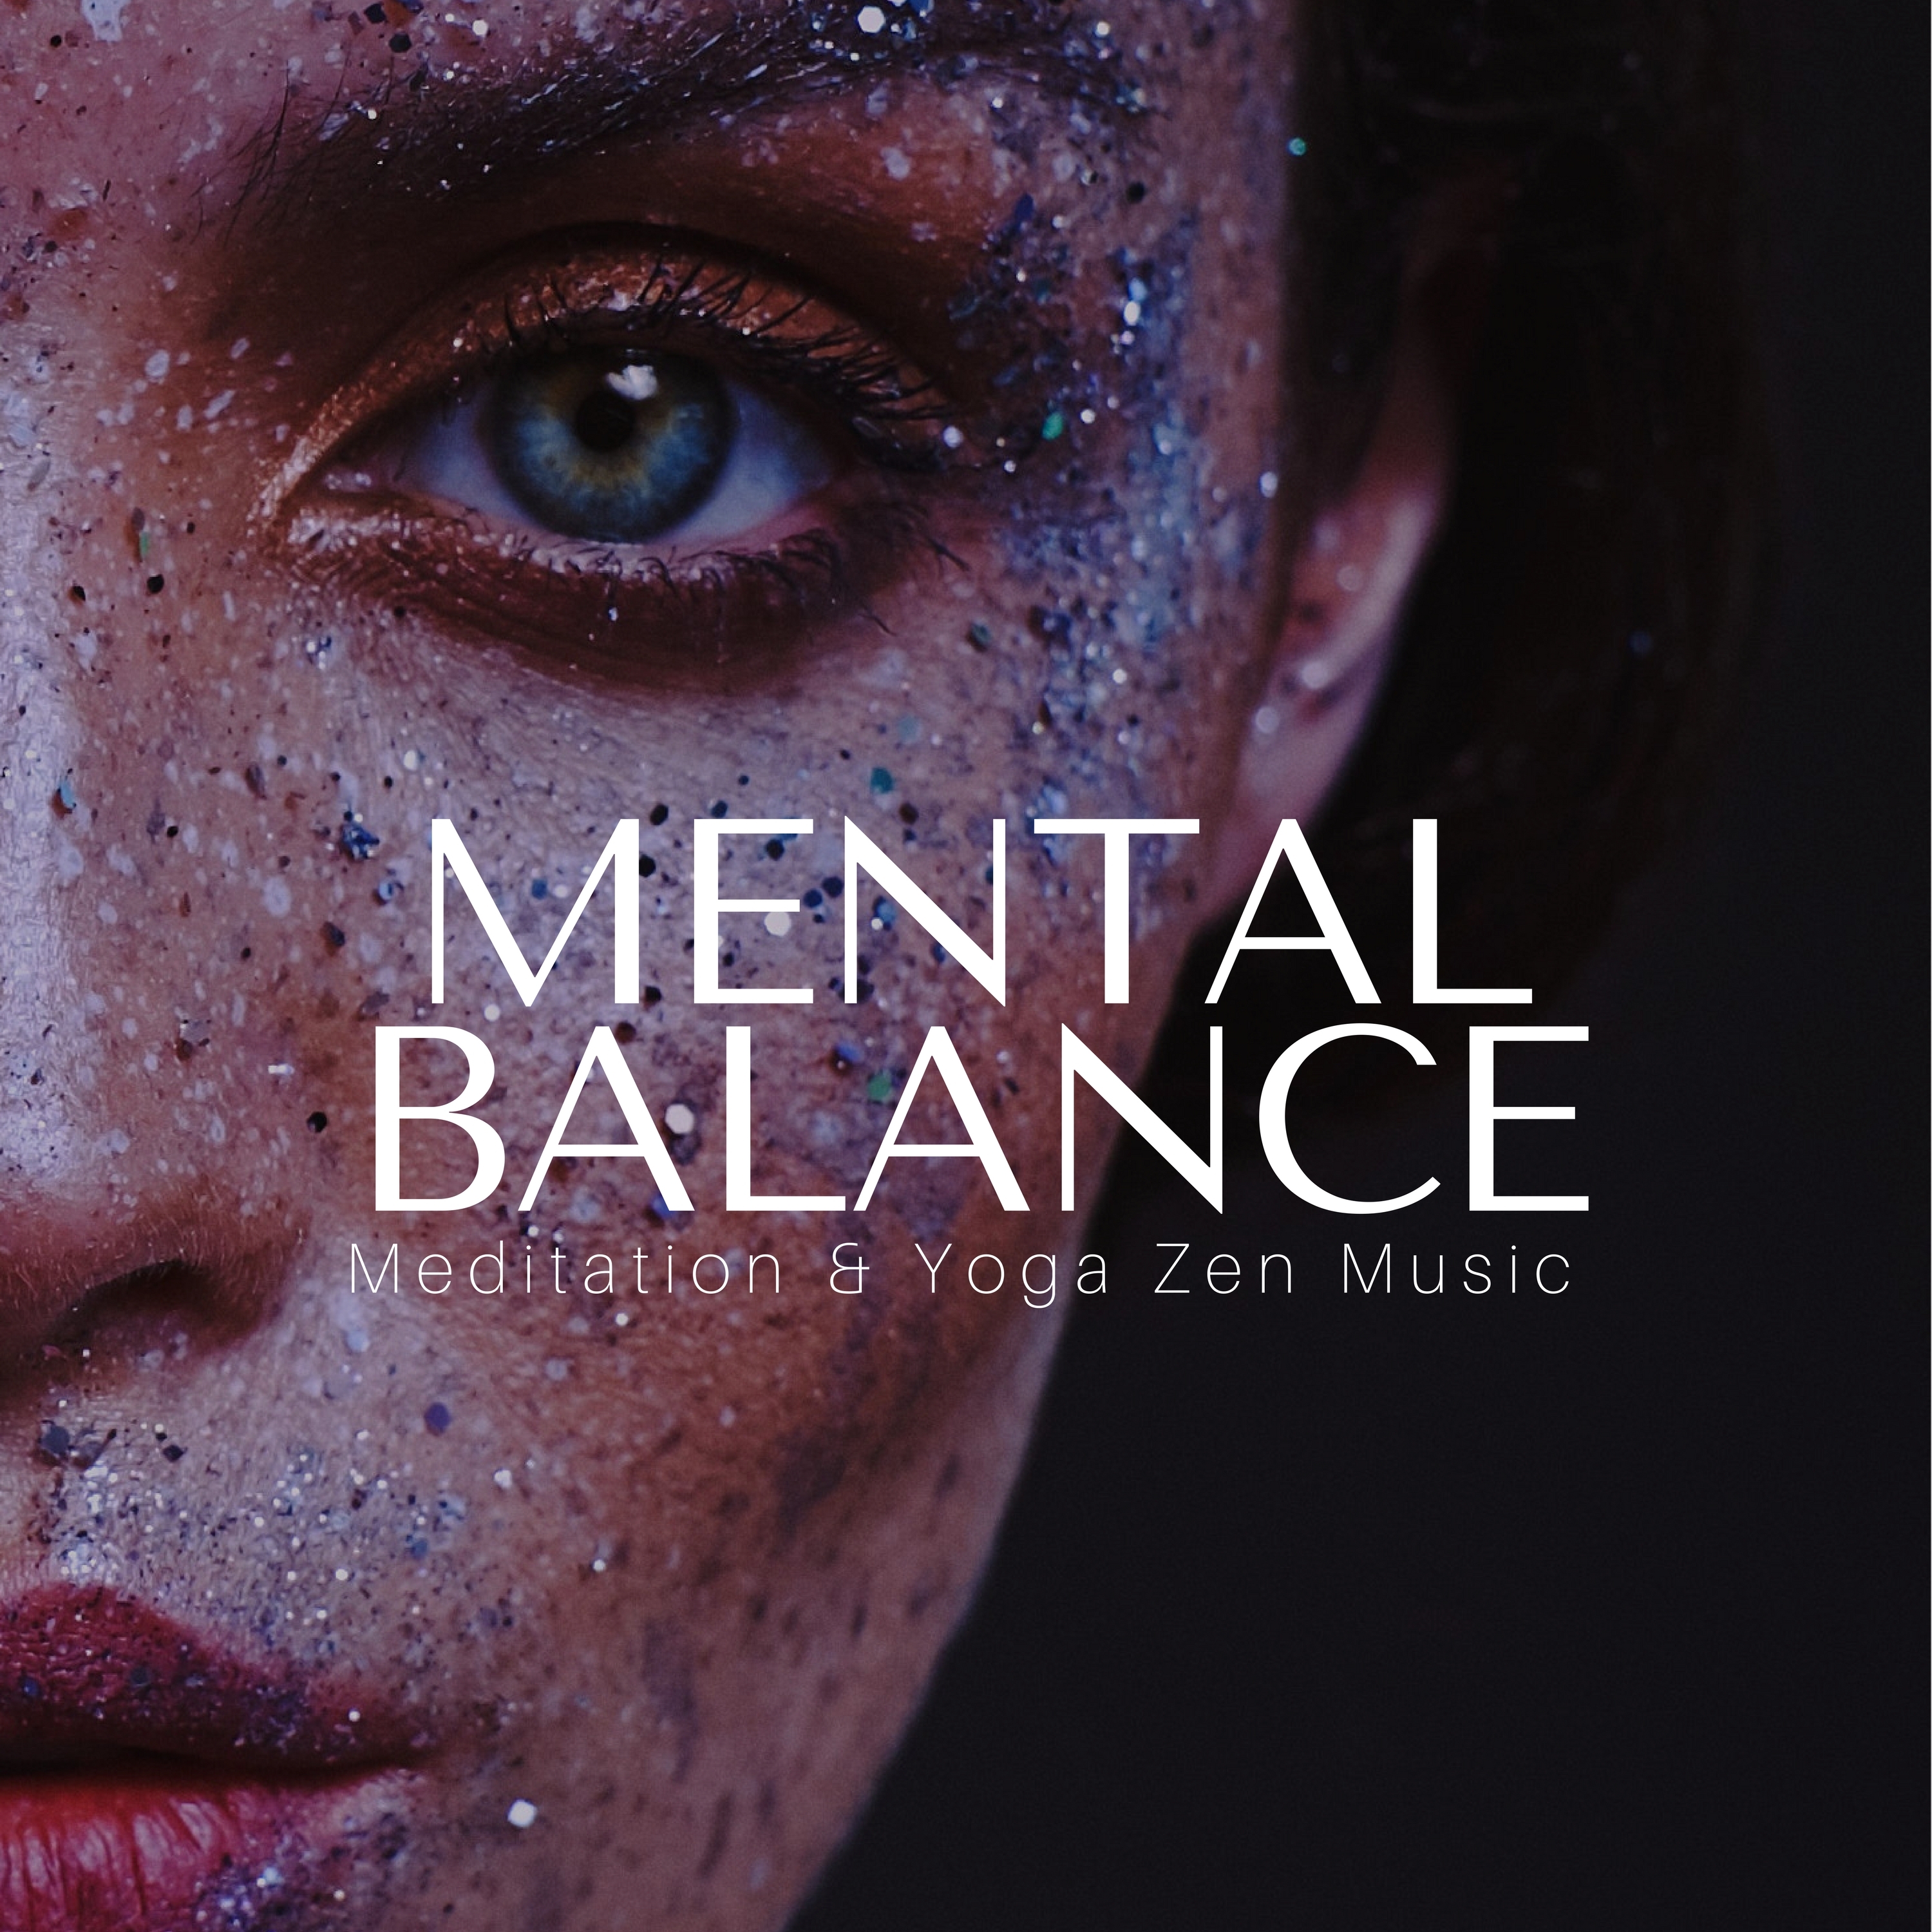 Mental Balance - Meditation & Yoga Zen Music for Positive Energy, Total Relaxation, Healthy Lifestyle